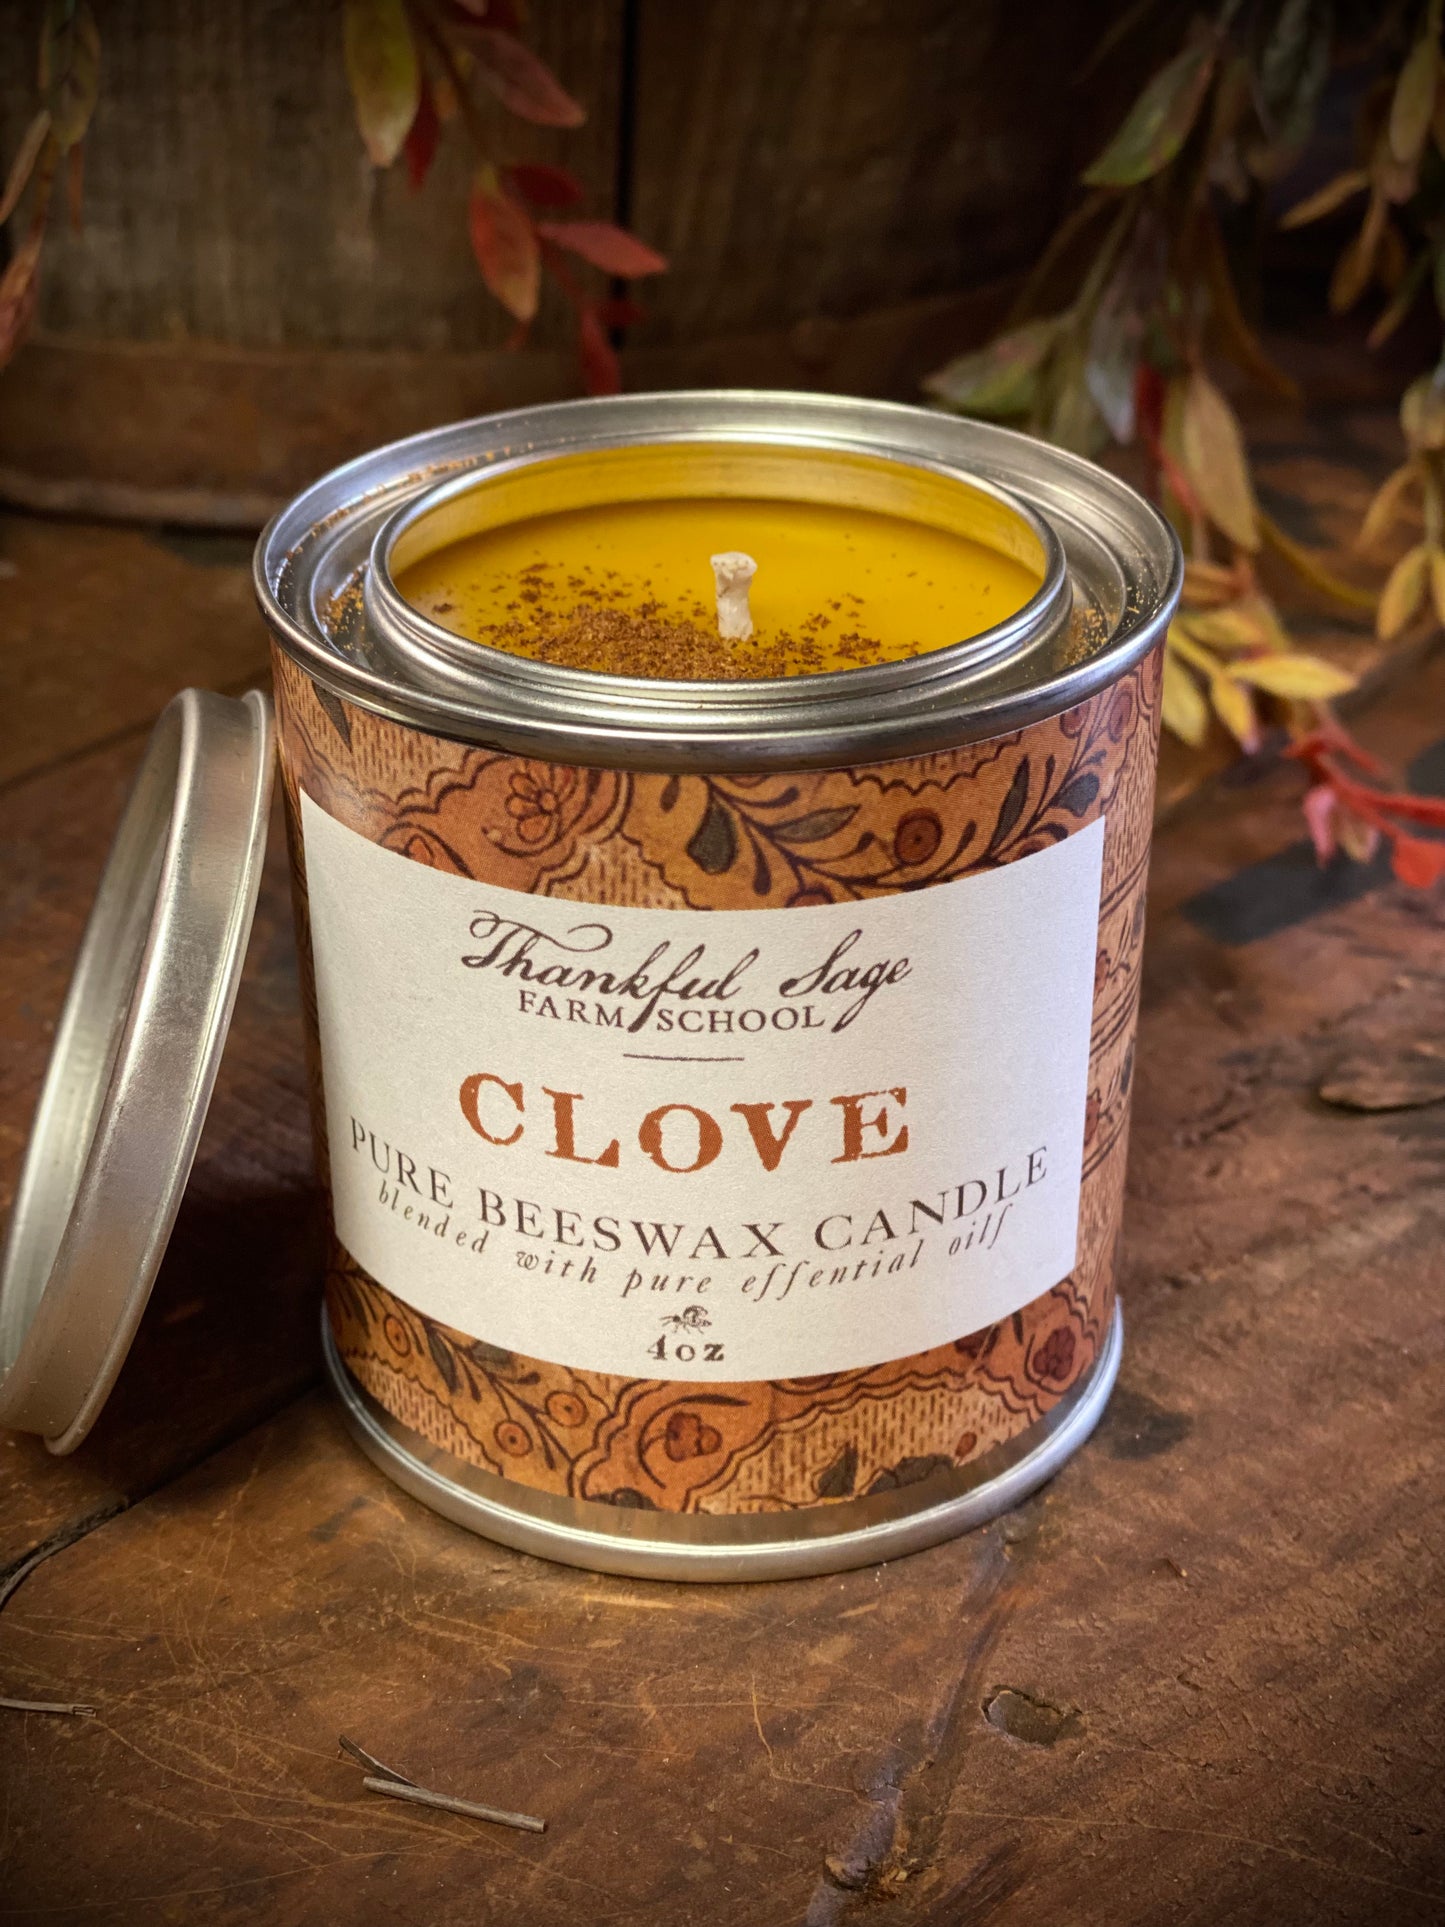 Clove Pure Beeswax Candle